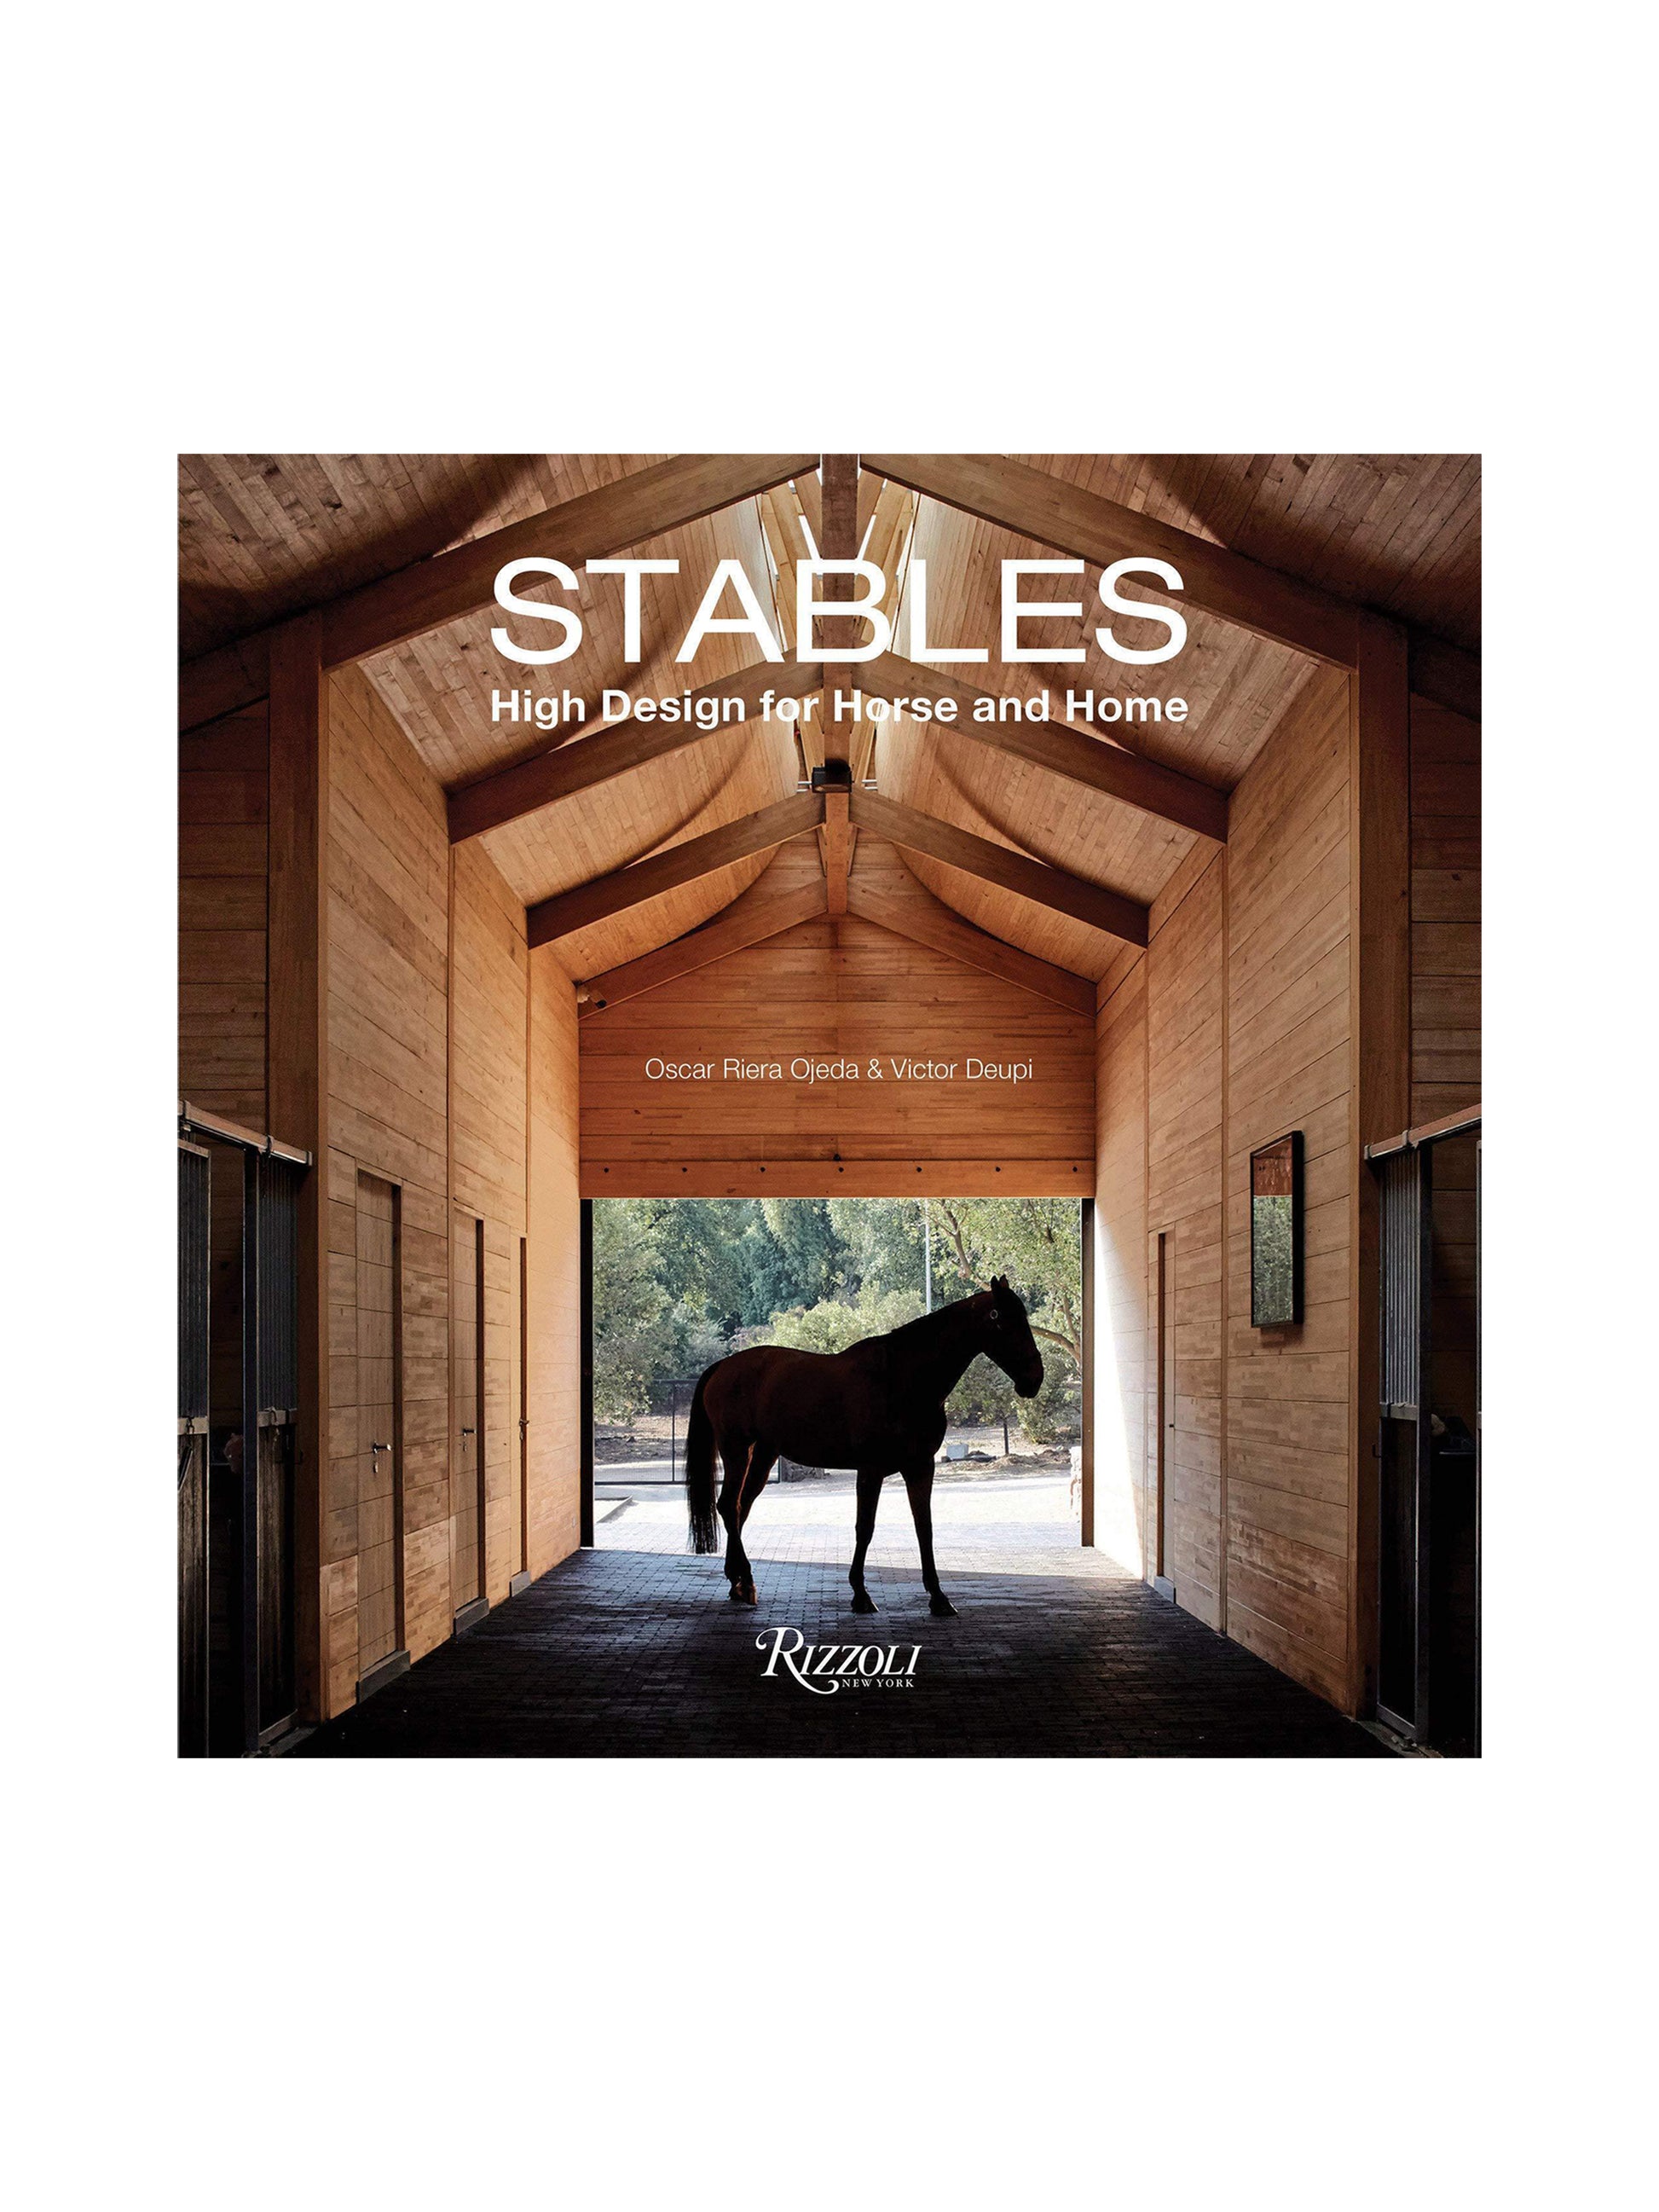 Stables: High Design for Horse and Home Weston Table